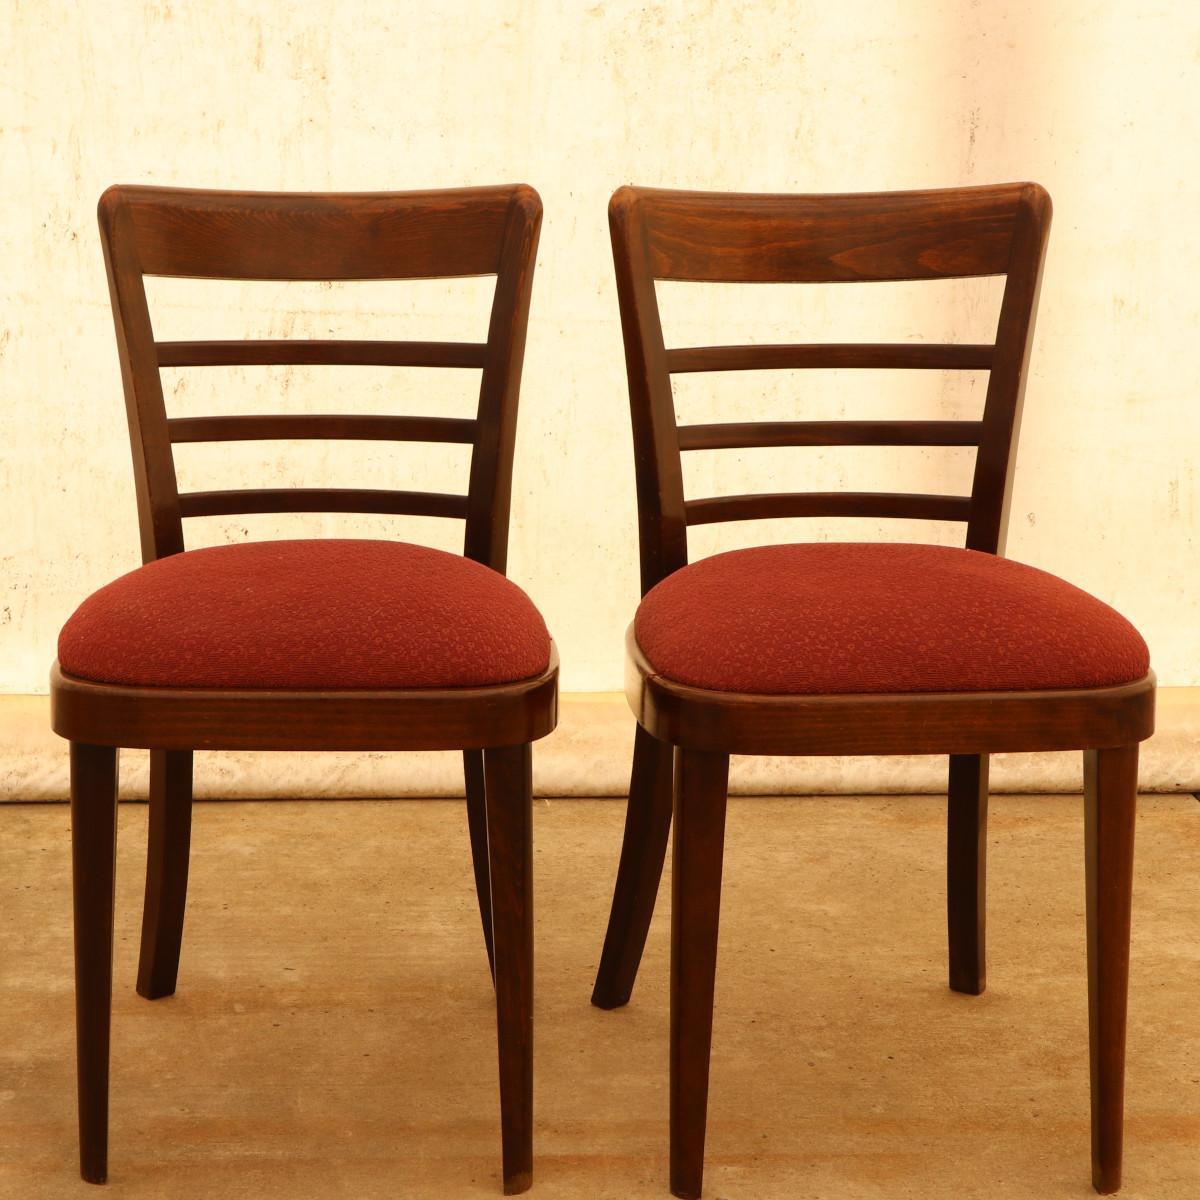 Set of 4 dining chairs by TON - successor to Thonet in the former Czechoslovakia.
These chairs were made in the 1950s. Made of beechwood and upholstered in fabric. The chairs are in very good Vintage condition, with slight wear. Marked TON